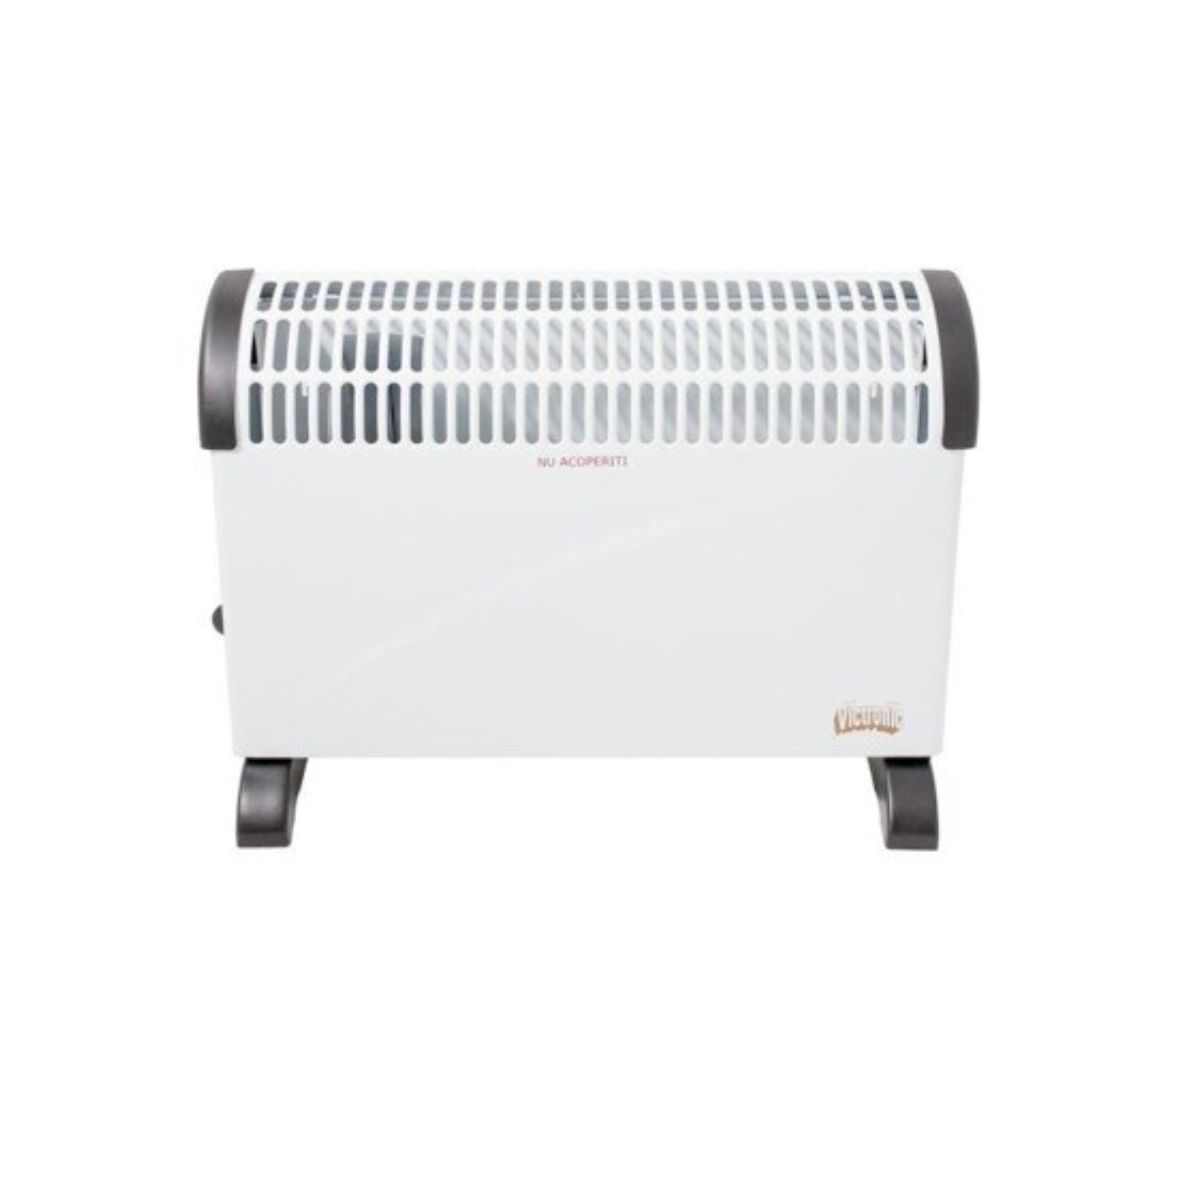 Sisteme de incalzire - Convector electric 2000w, Victronic, hectarul.ro